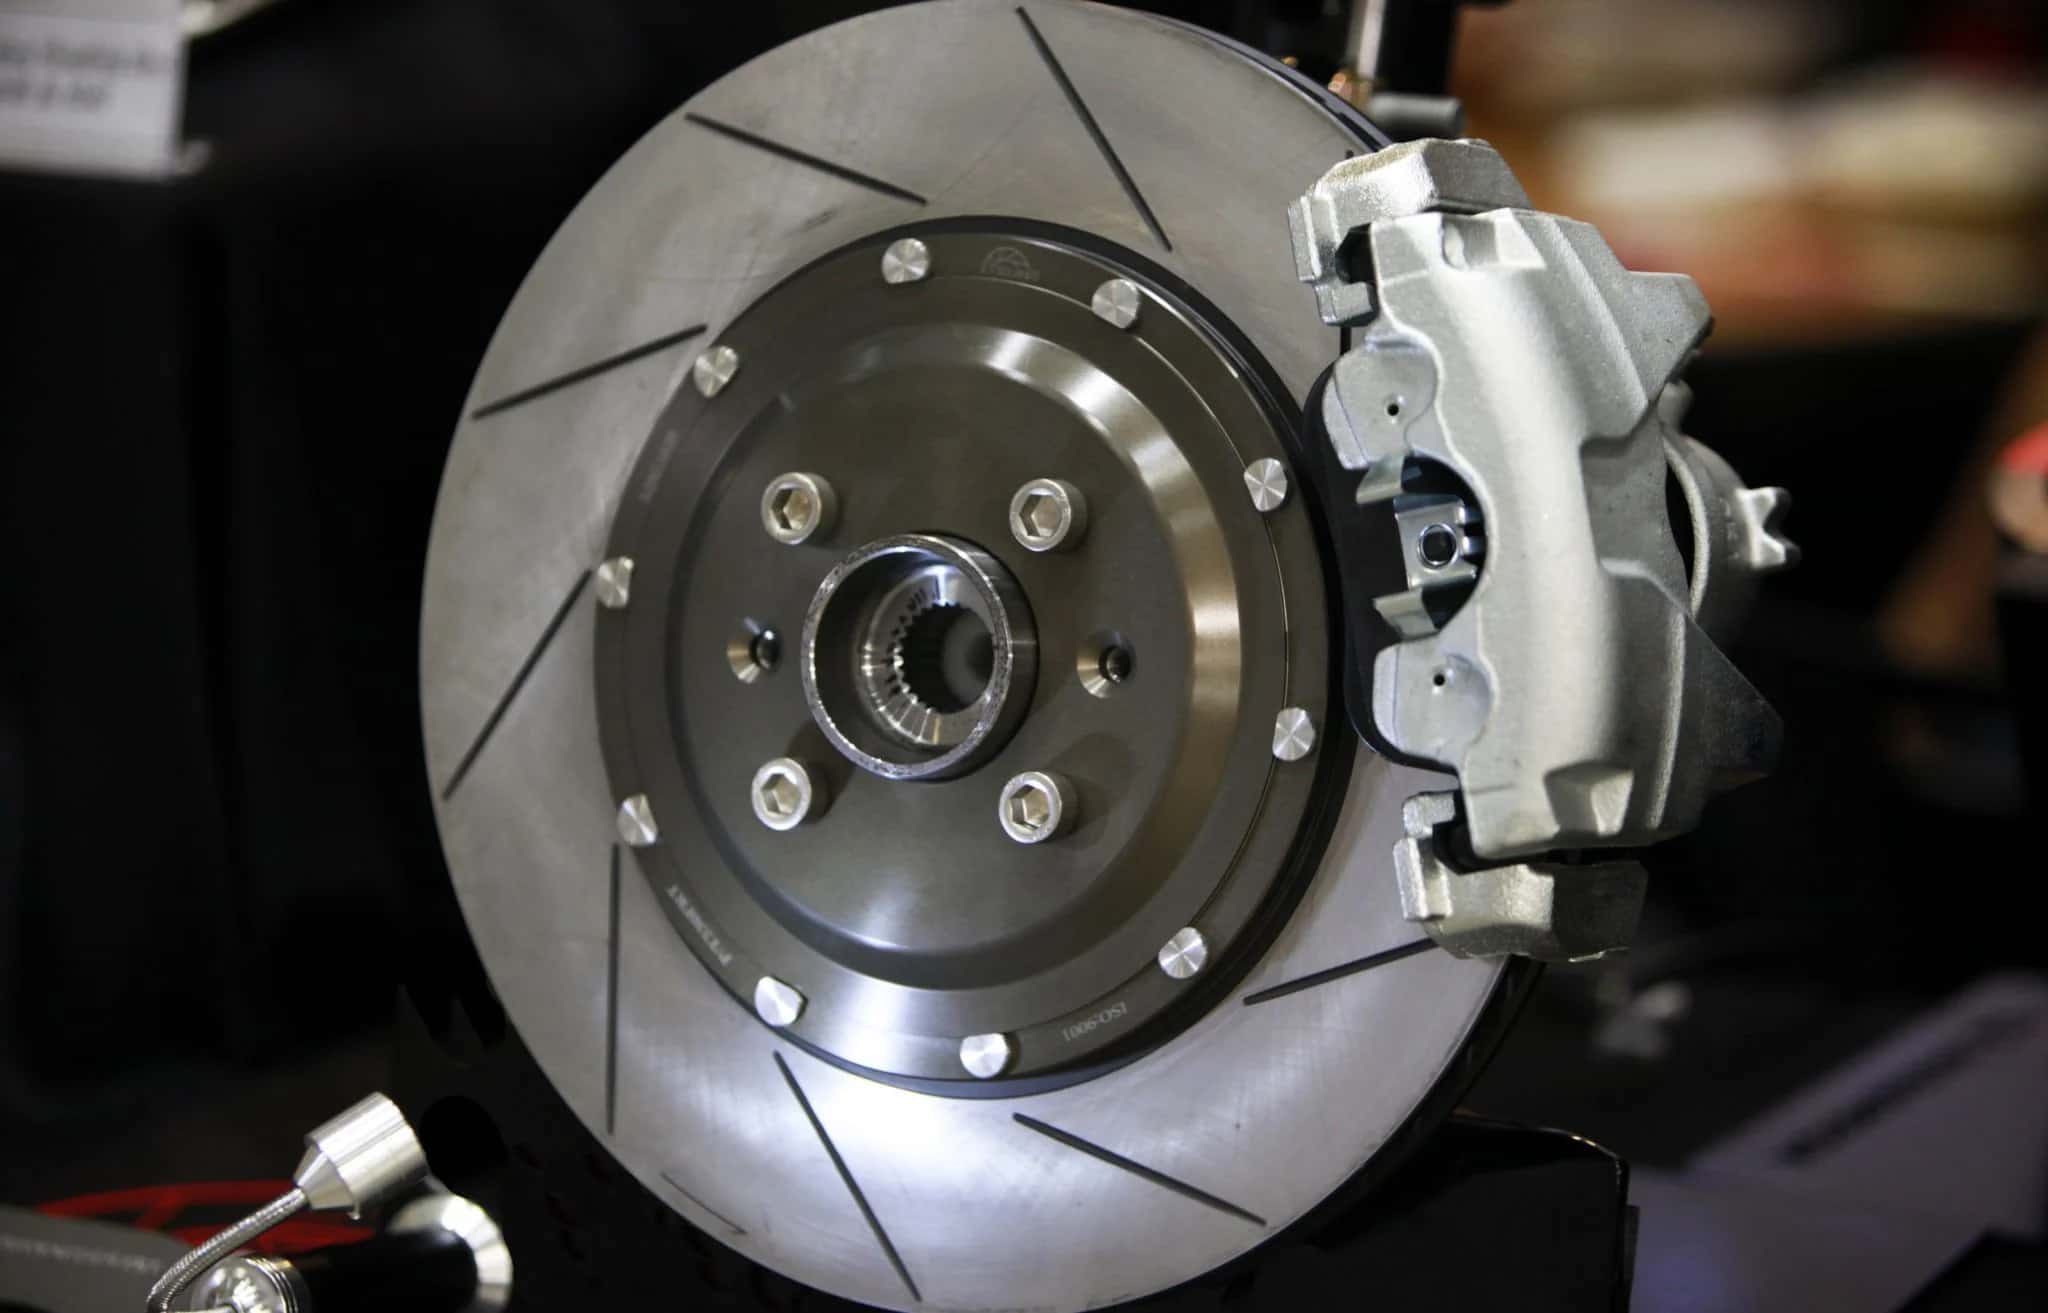 How do you know when to change your brake rotors? - Uchanics: Auto Repair